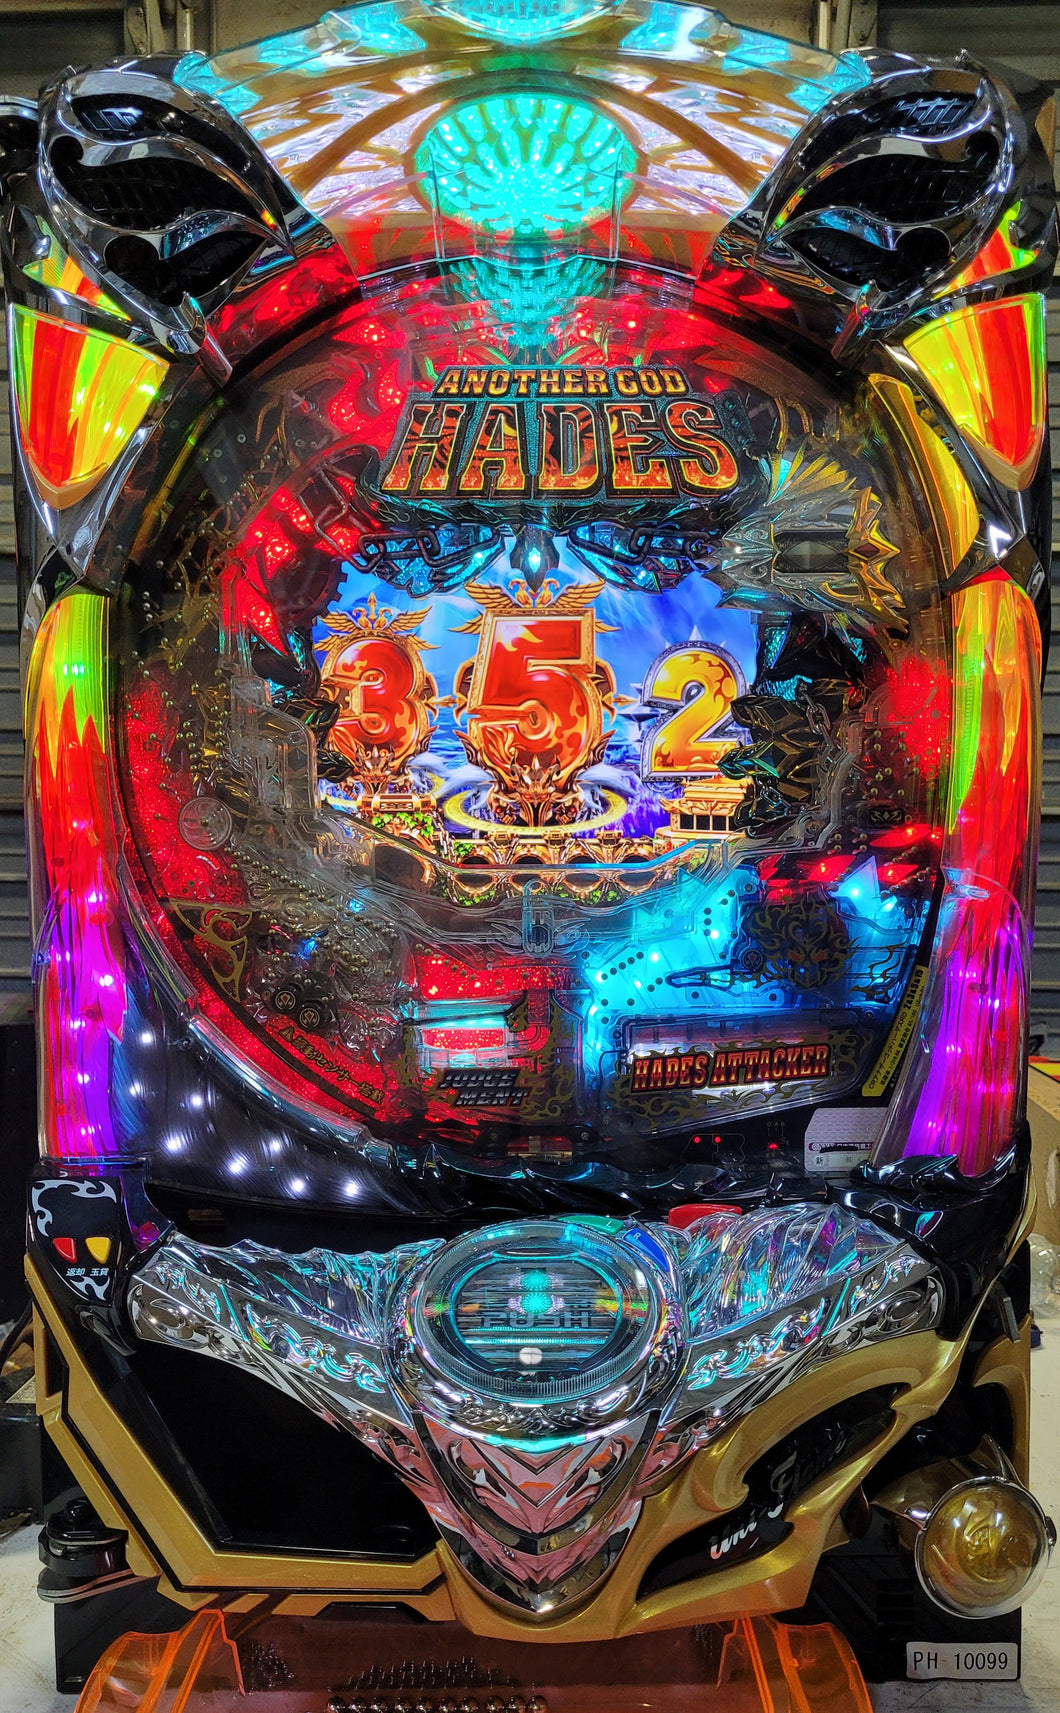 Hades Advent: Another God Pachinko